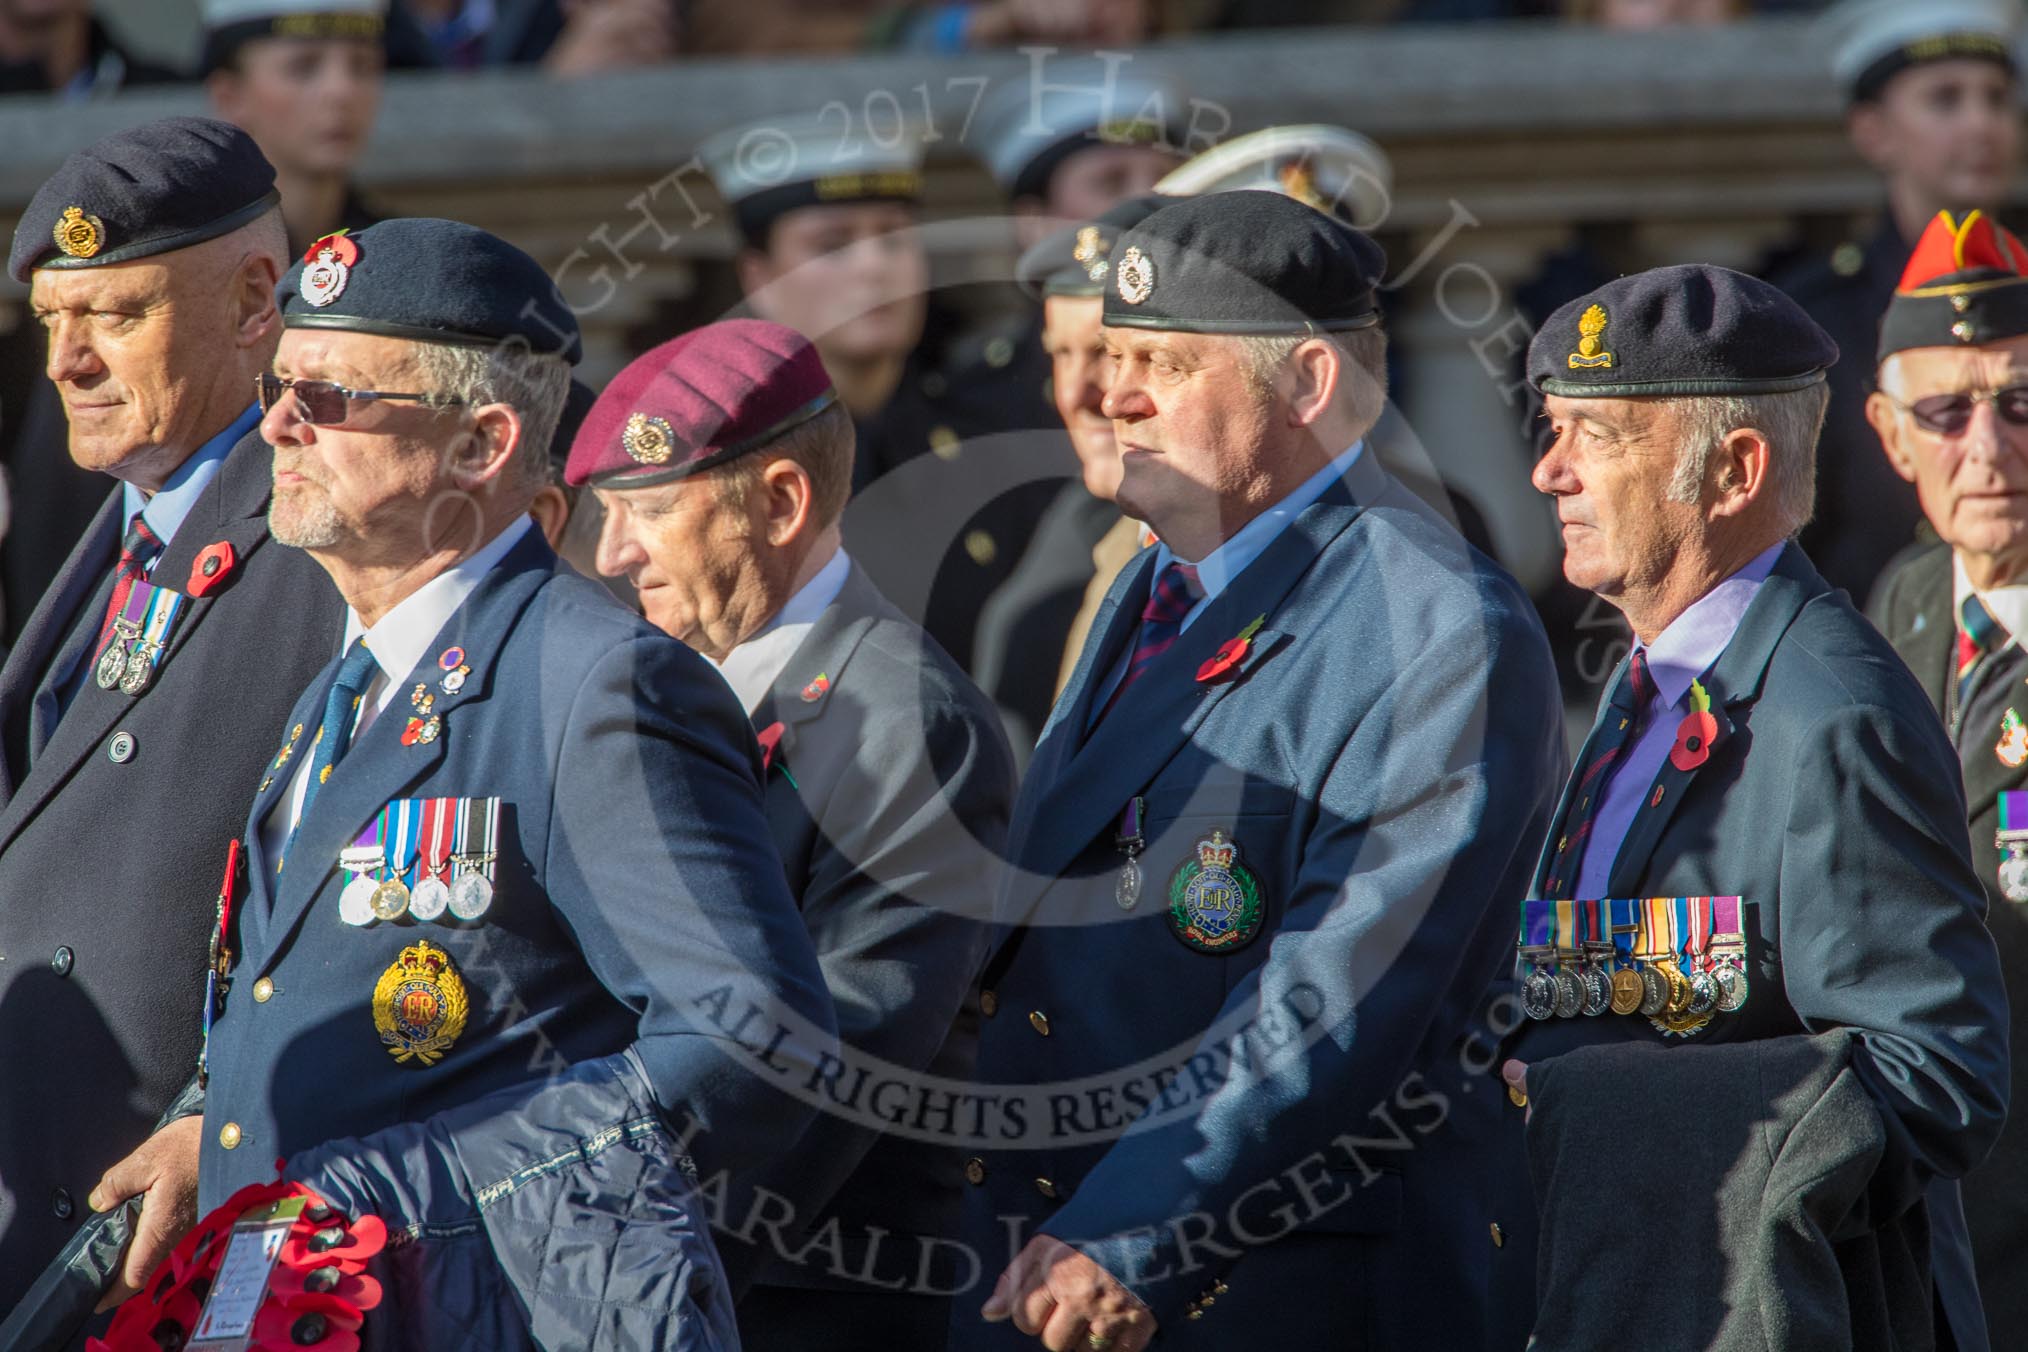 Beachley Old Boys' Association (BOBA) (Group B25, 29 members) during the Royal British Legion March Past on Remembrance Sunday at the Cenotaph, Whitehall, Westminster, London, 11 November 2018, 12:11.